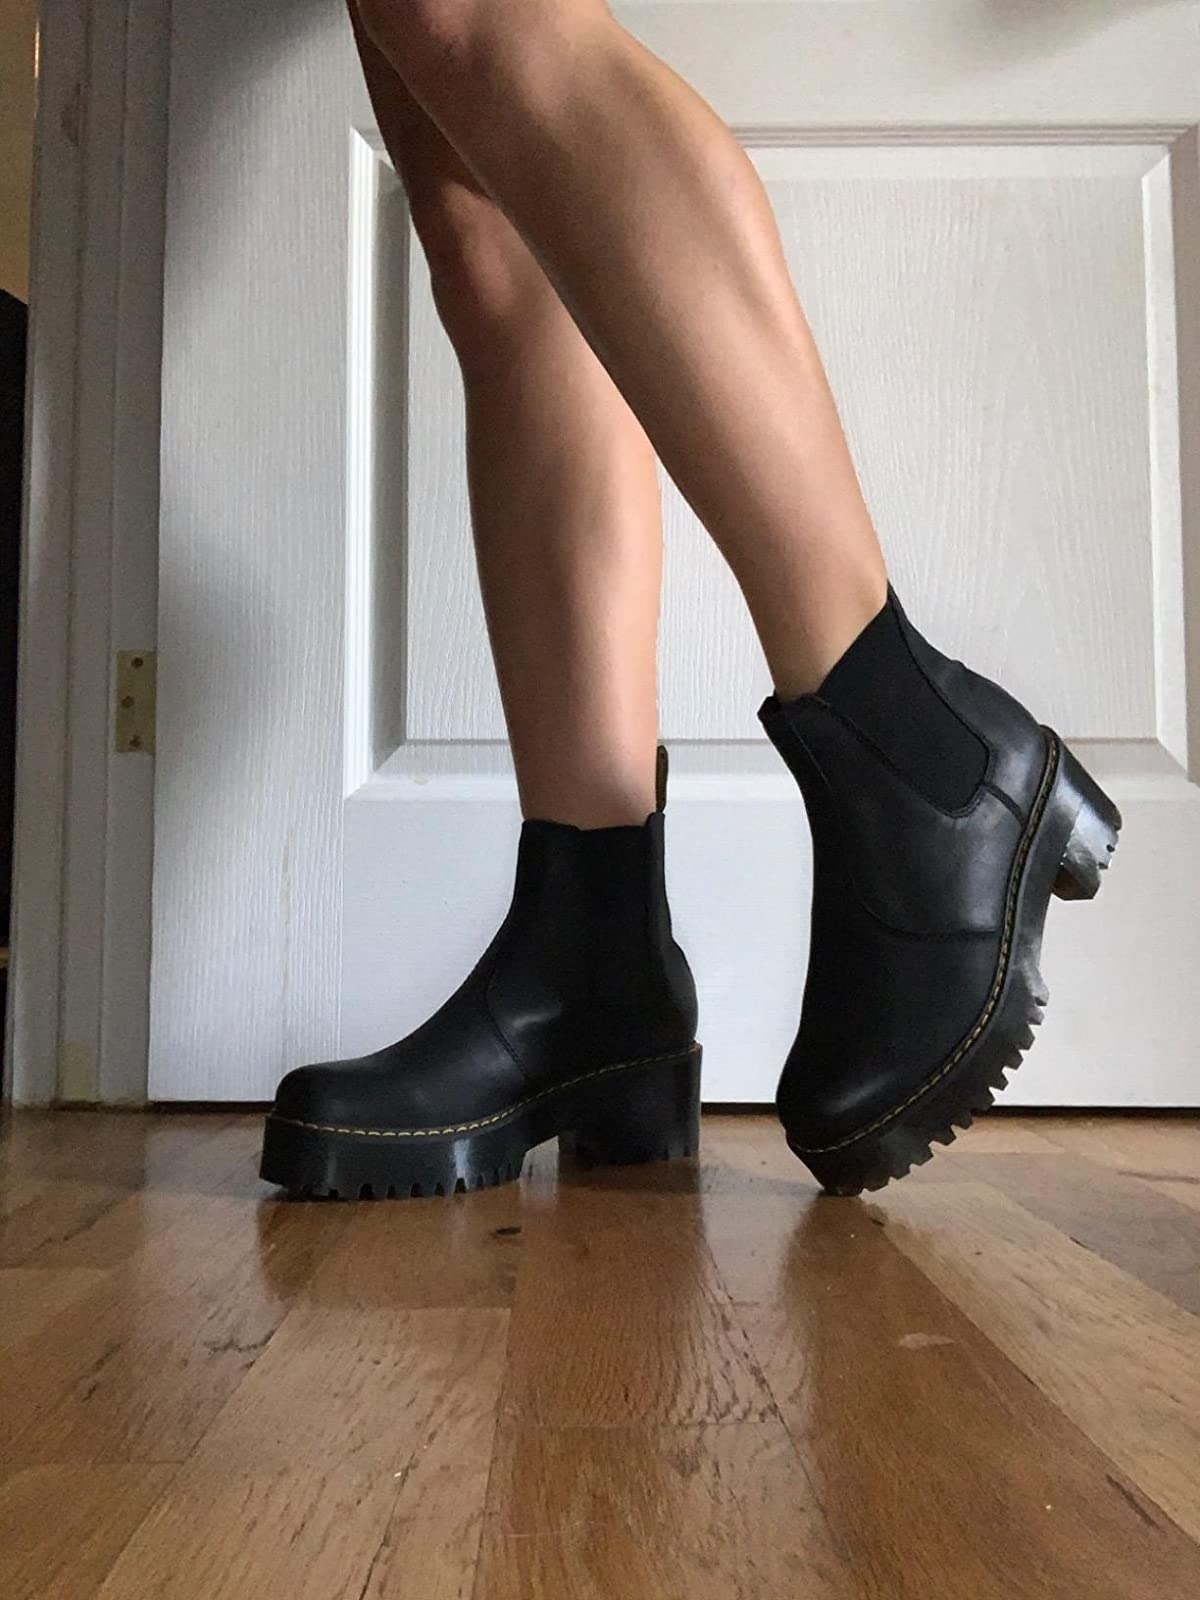 reviewer wearing the black boots